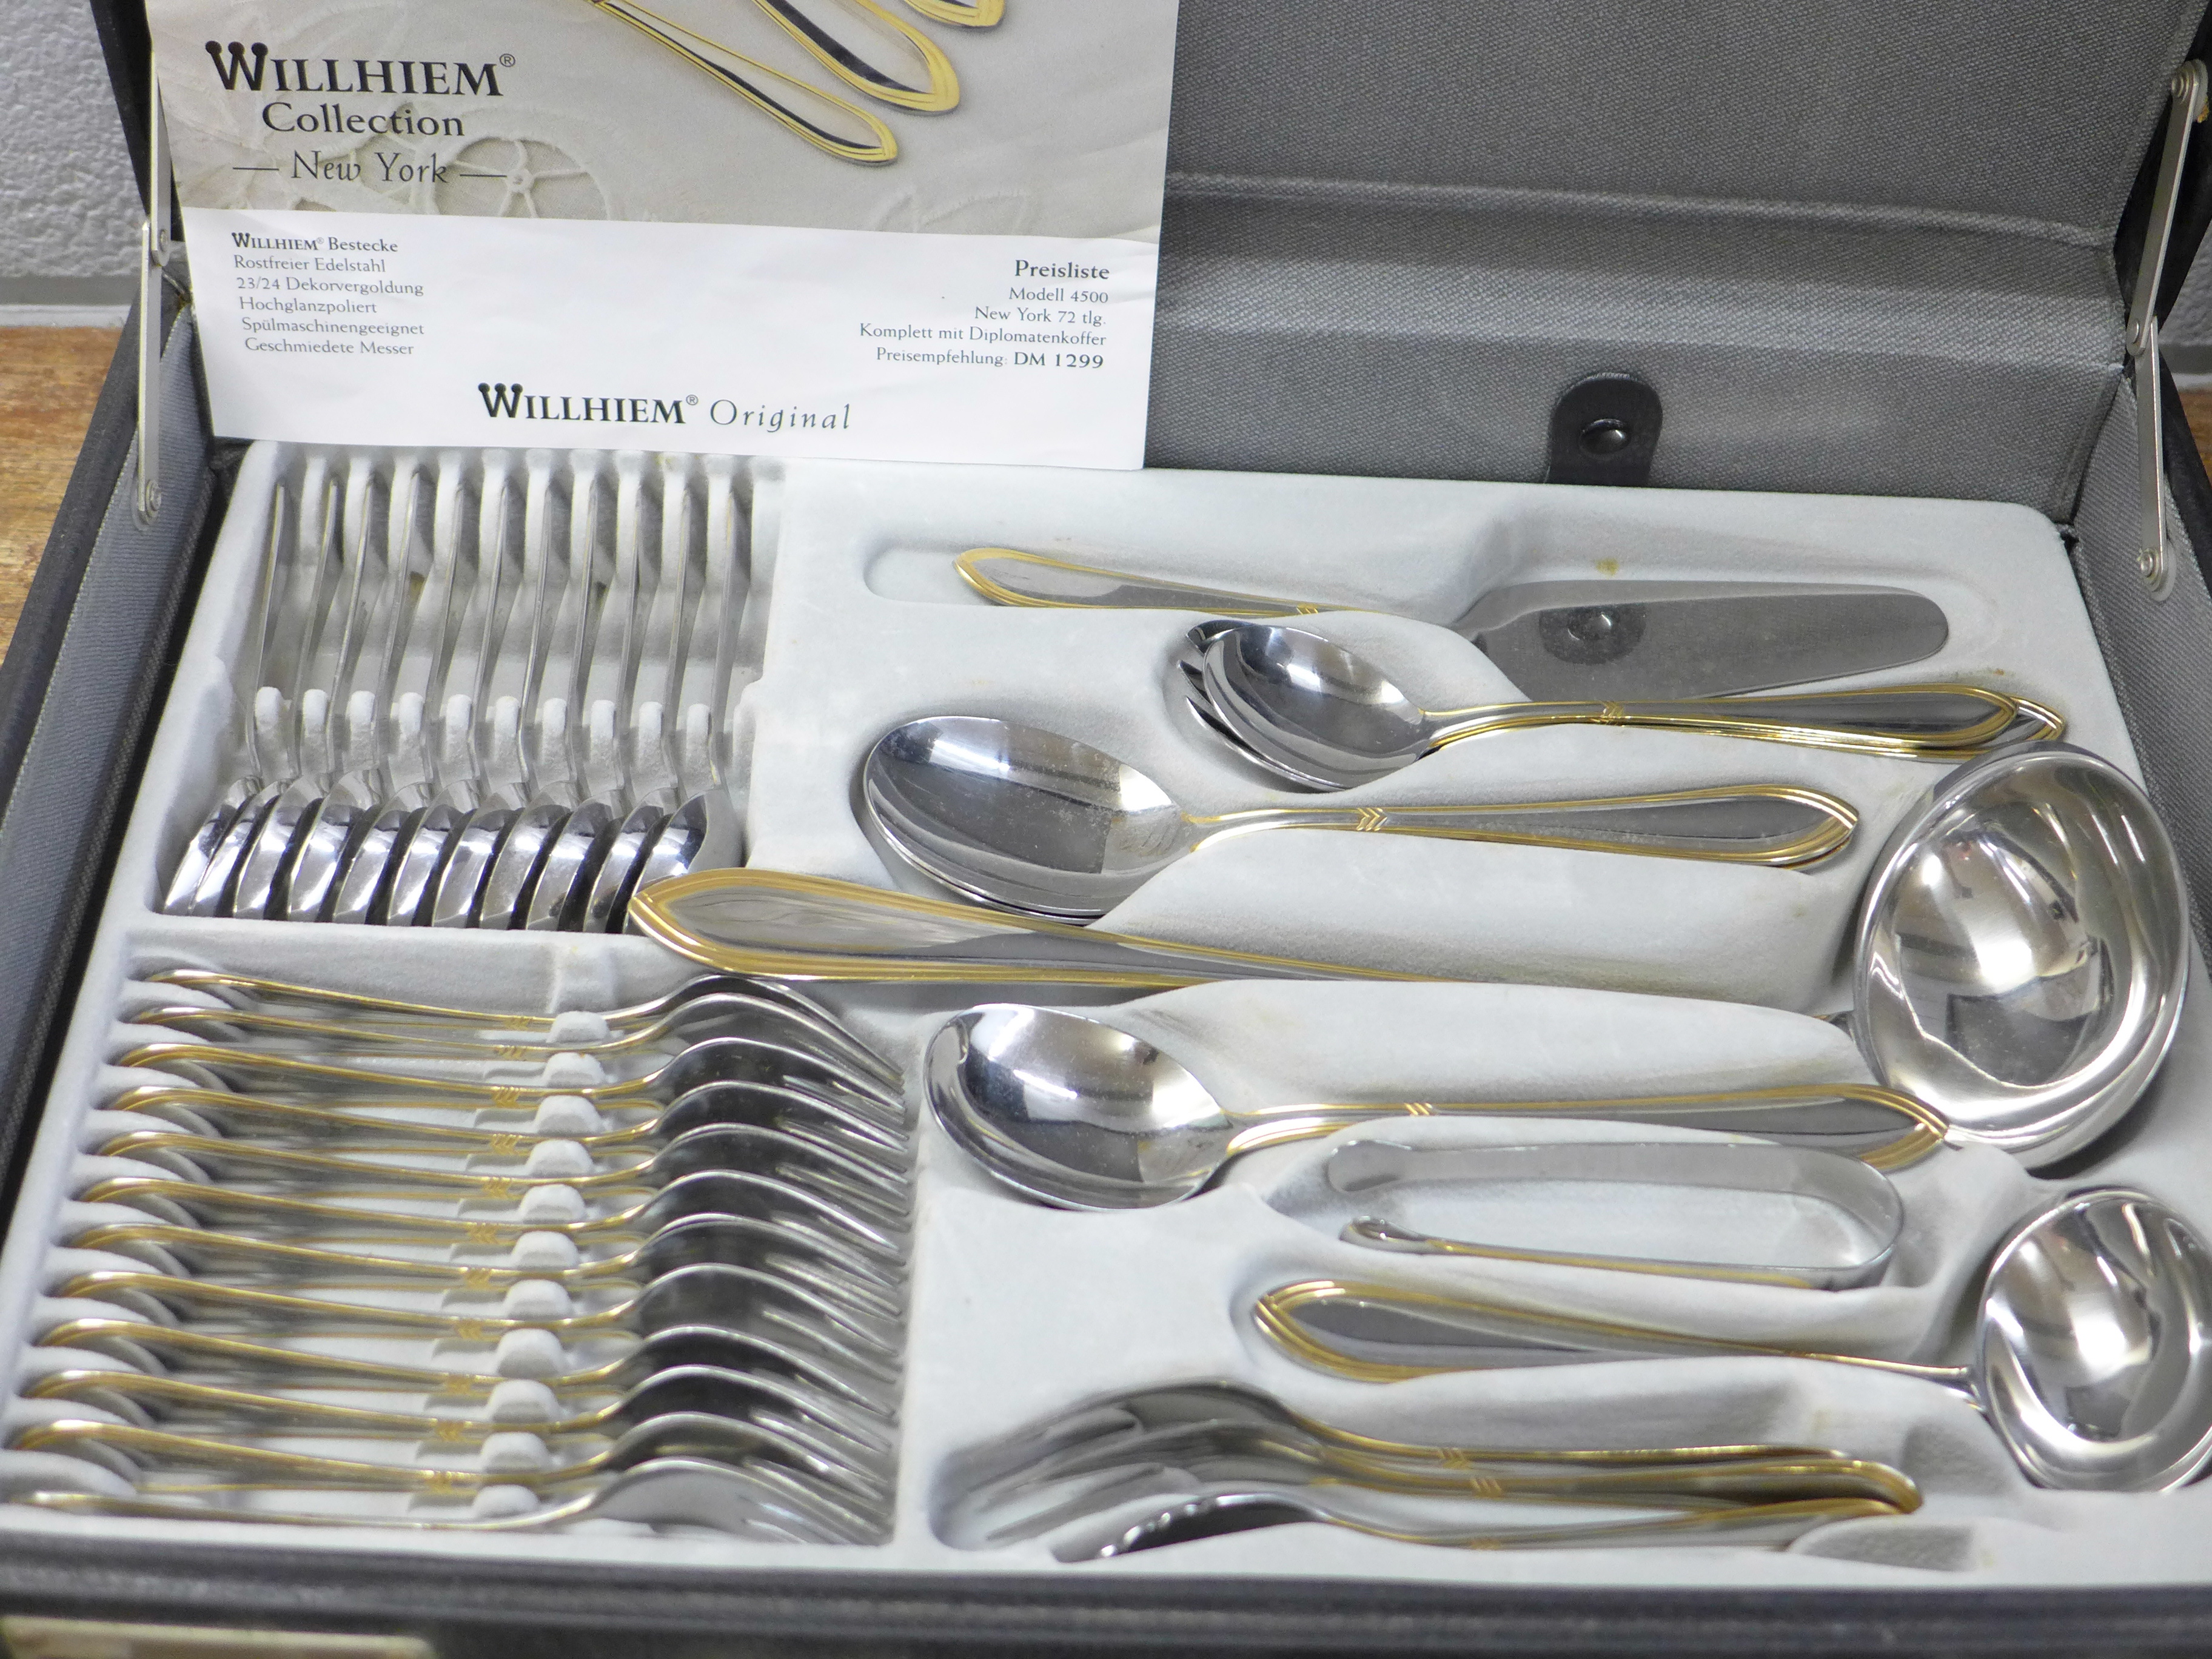 A Willheim Collection New York canteen of cutlery - Image 2 of 2